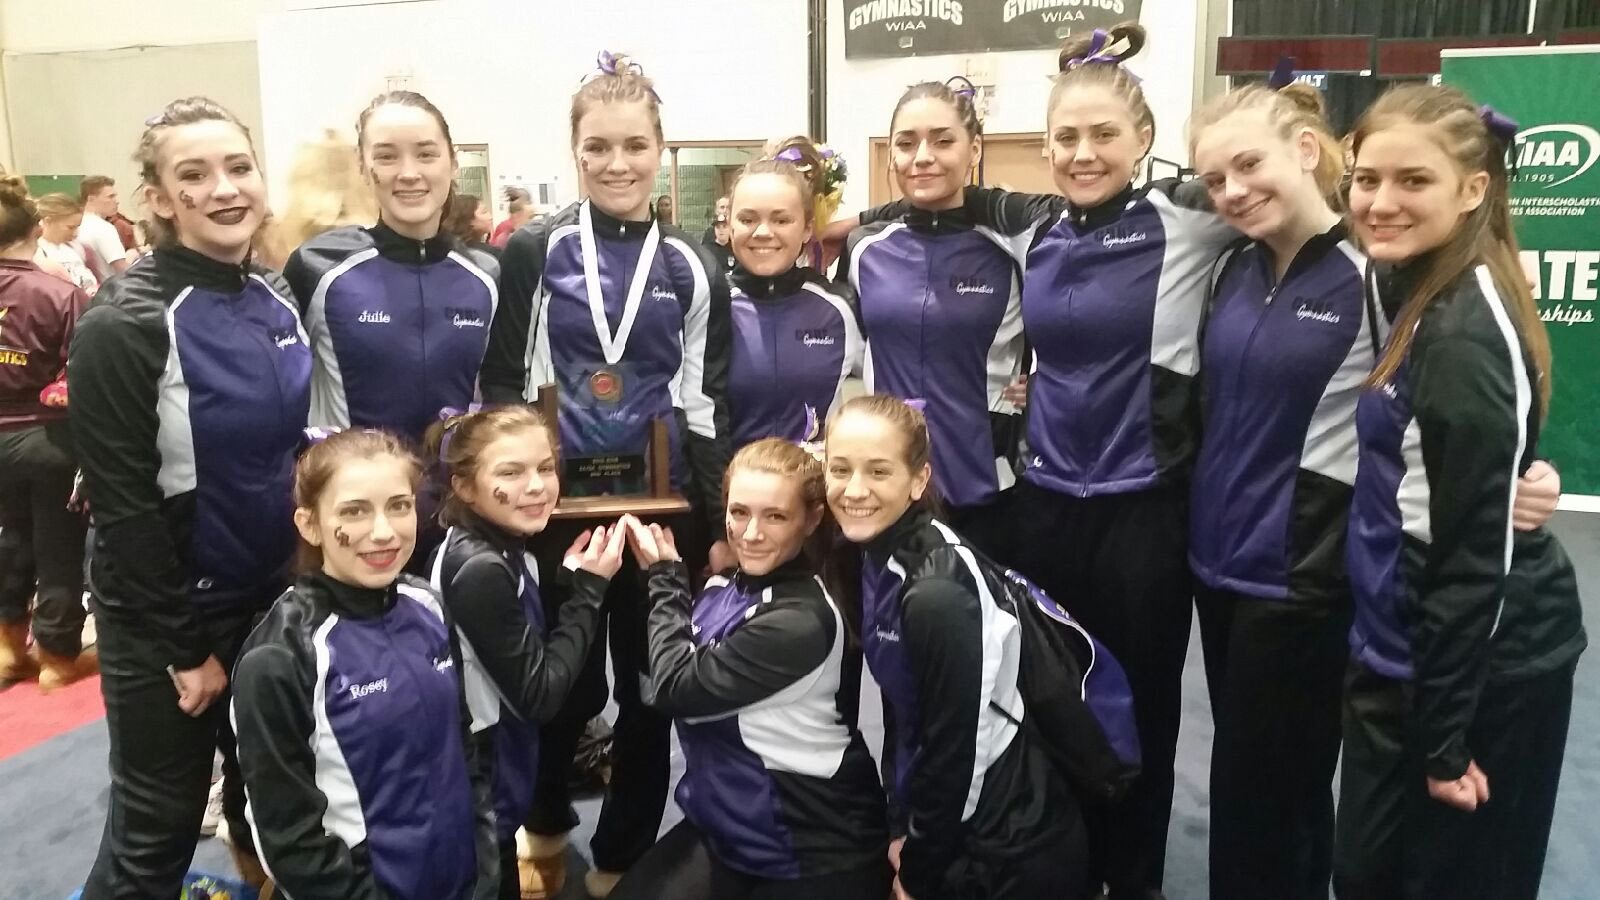 Columbia River gymnastics team that placed third at the 3A/2A state championships in Tacoma on Friday, Feb. 19, 2016.